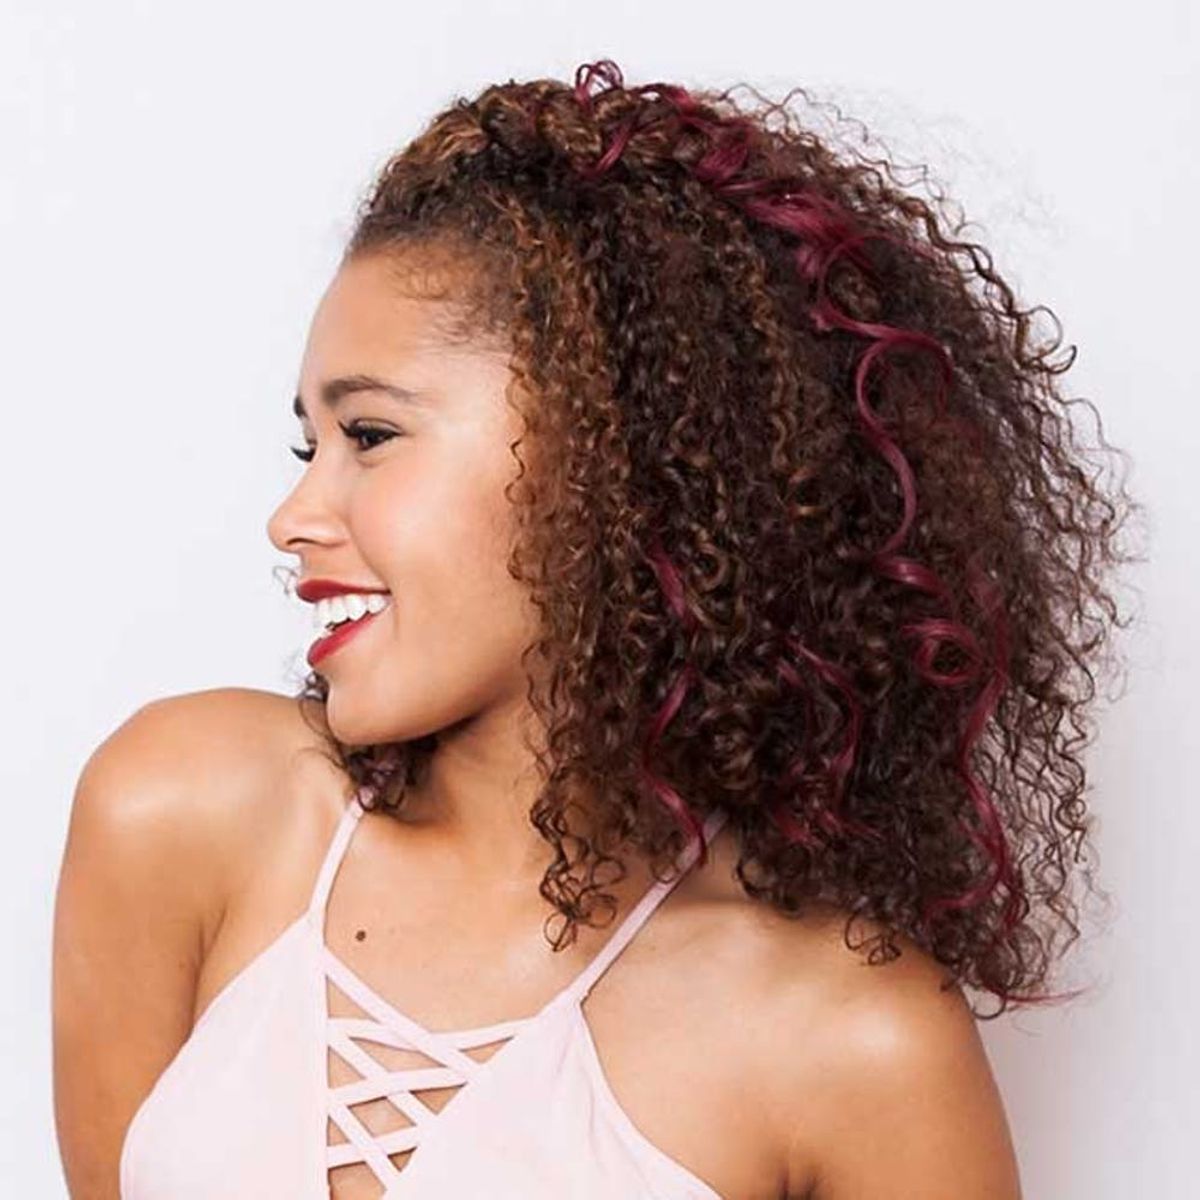 The Easiest Hack for Adding Color to Your Curly Hair on Your Wedding Day